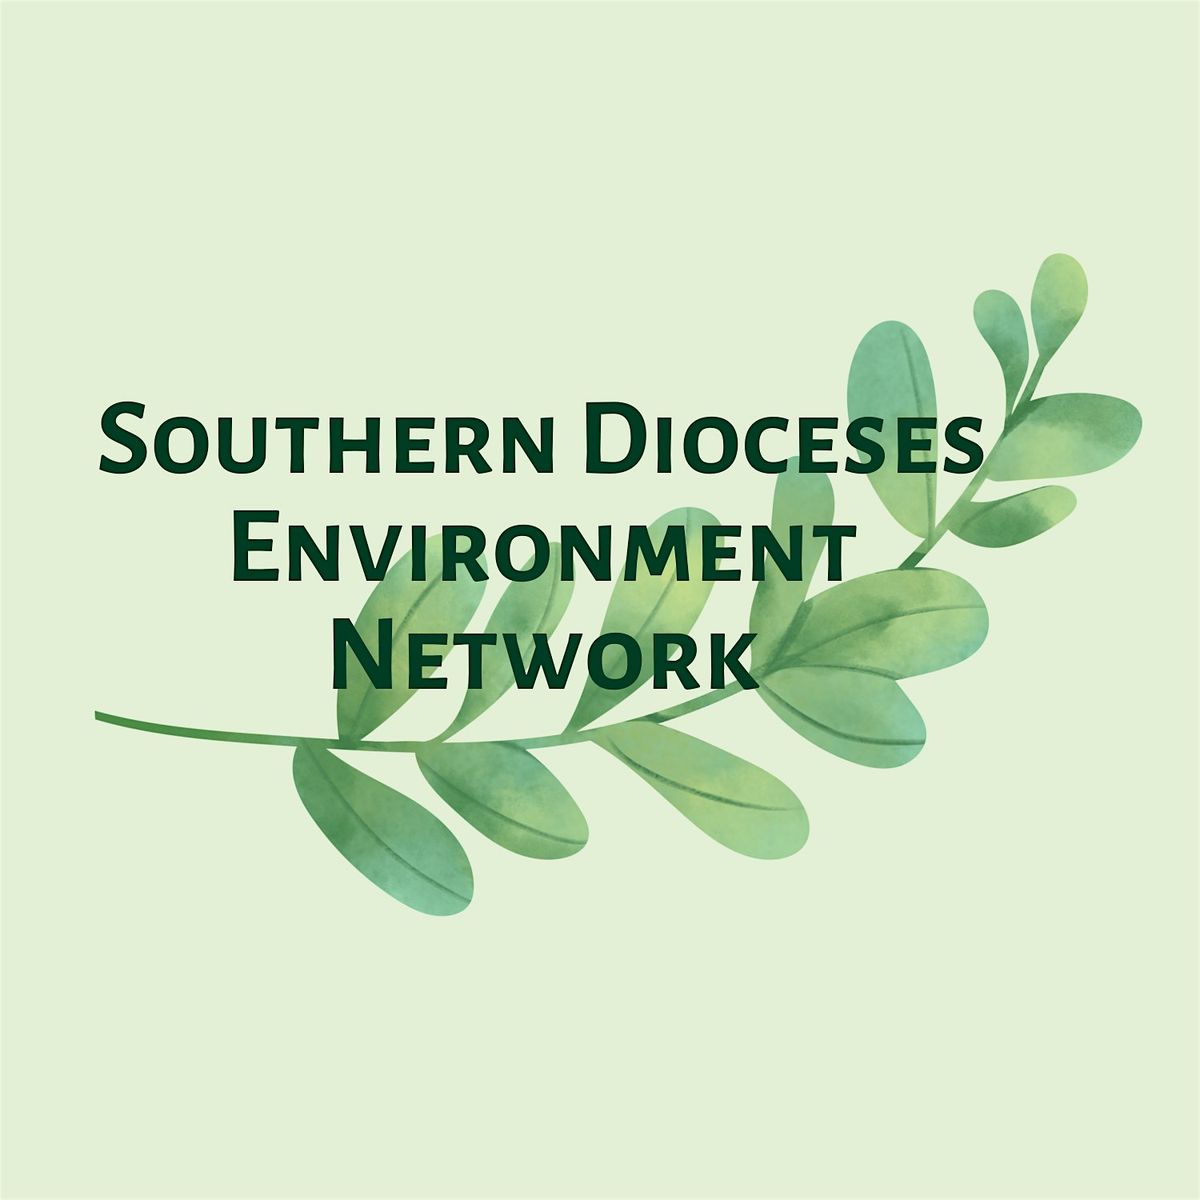 Southern Dioceses Environment Network  - The Climate Coalition